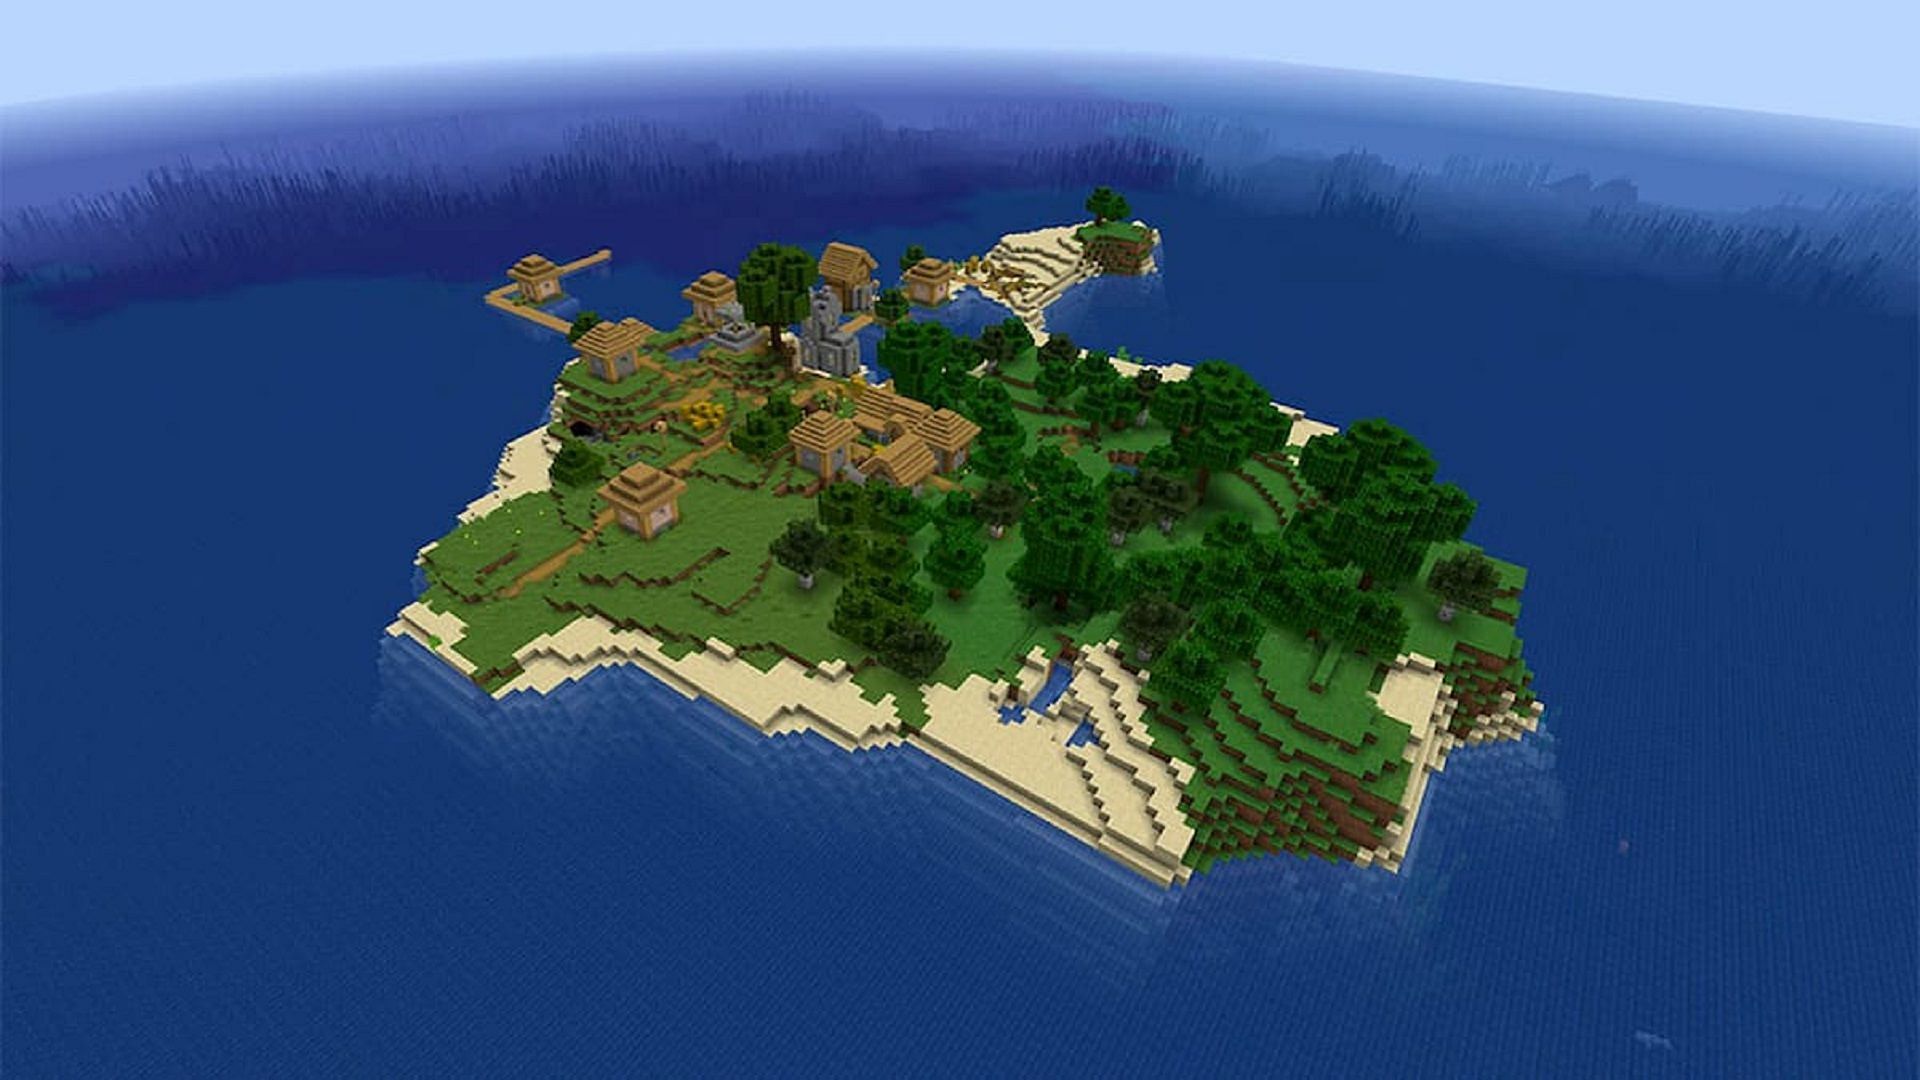 This survival island&#039;s village may not appear at all depending on the version of the game being played (Image via Mojang)